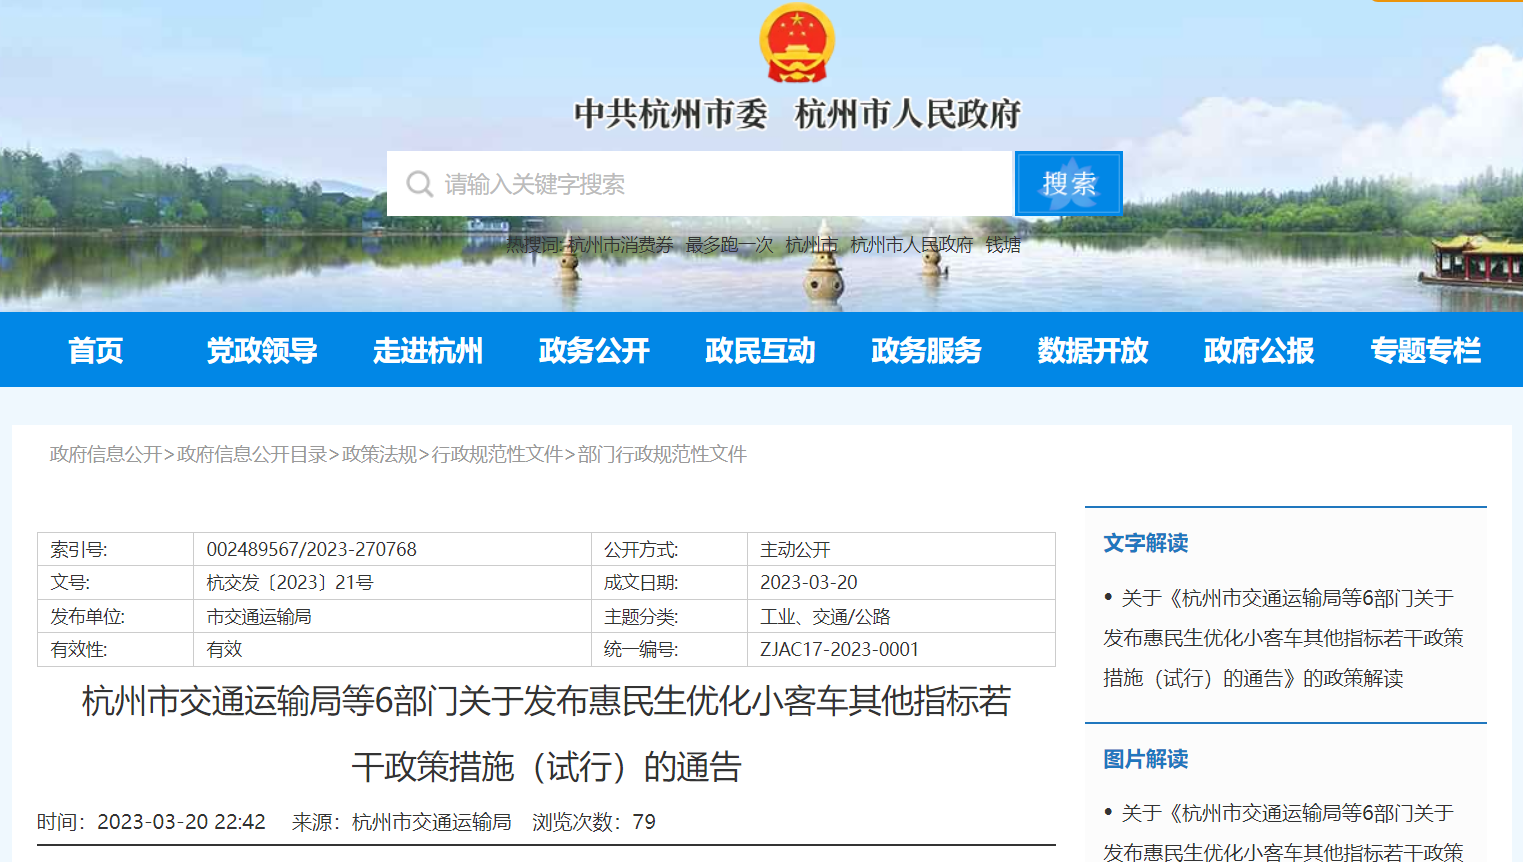 Hangzhou issues trial notice, eligible individuals can directly apply for car license plates.